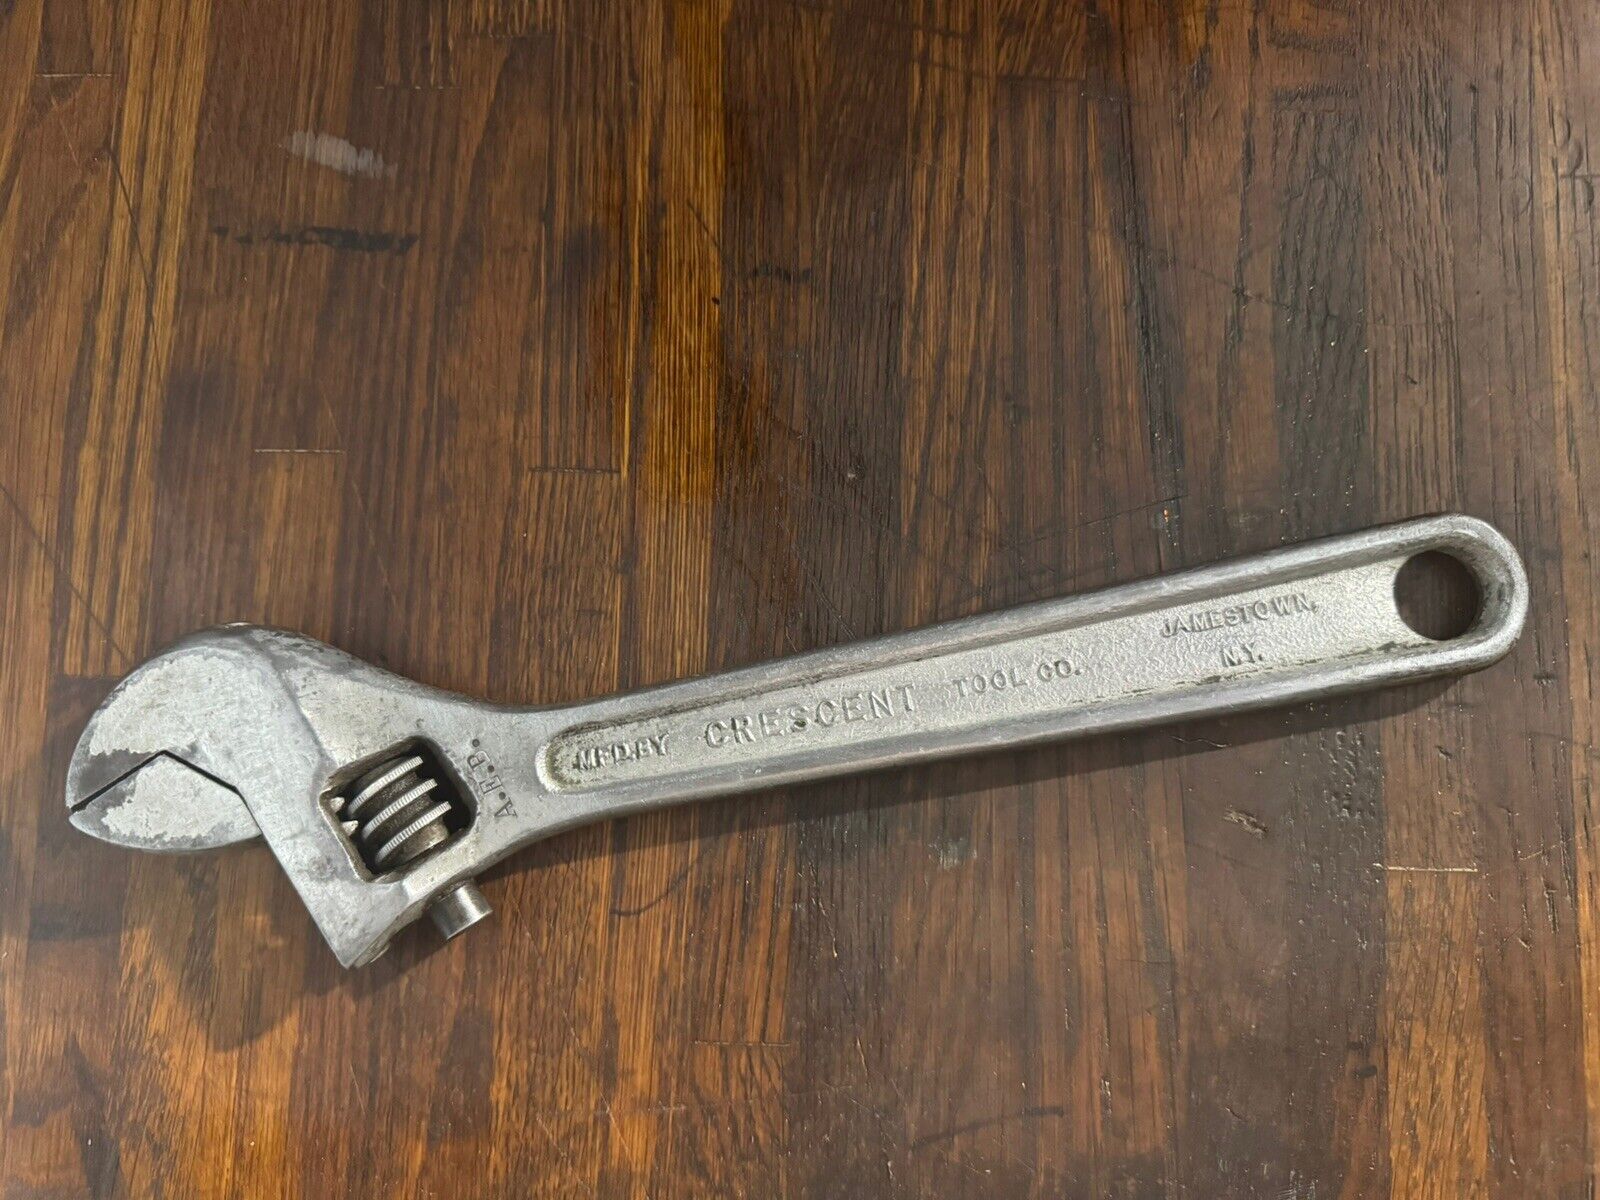 Vintage 12” inch Crescent adjustable Wrench Jamestown NY USA Made Vintage THICK